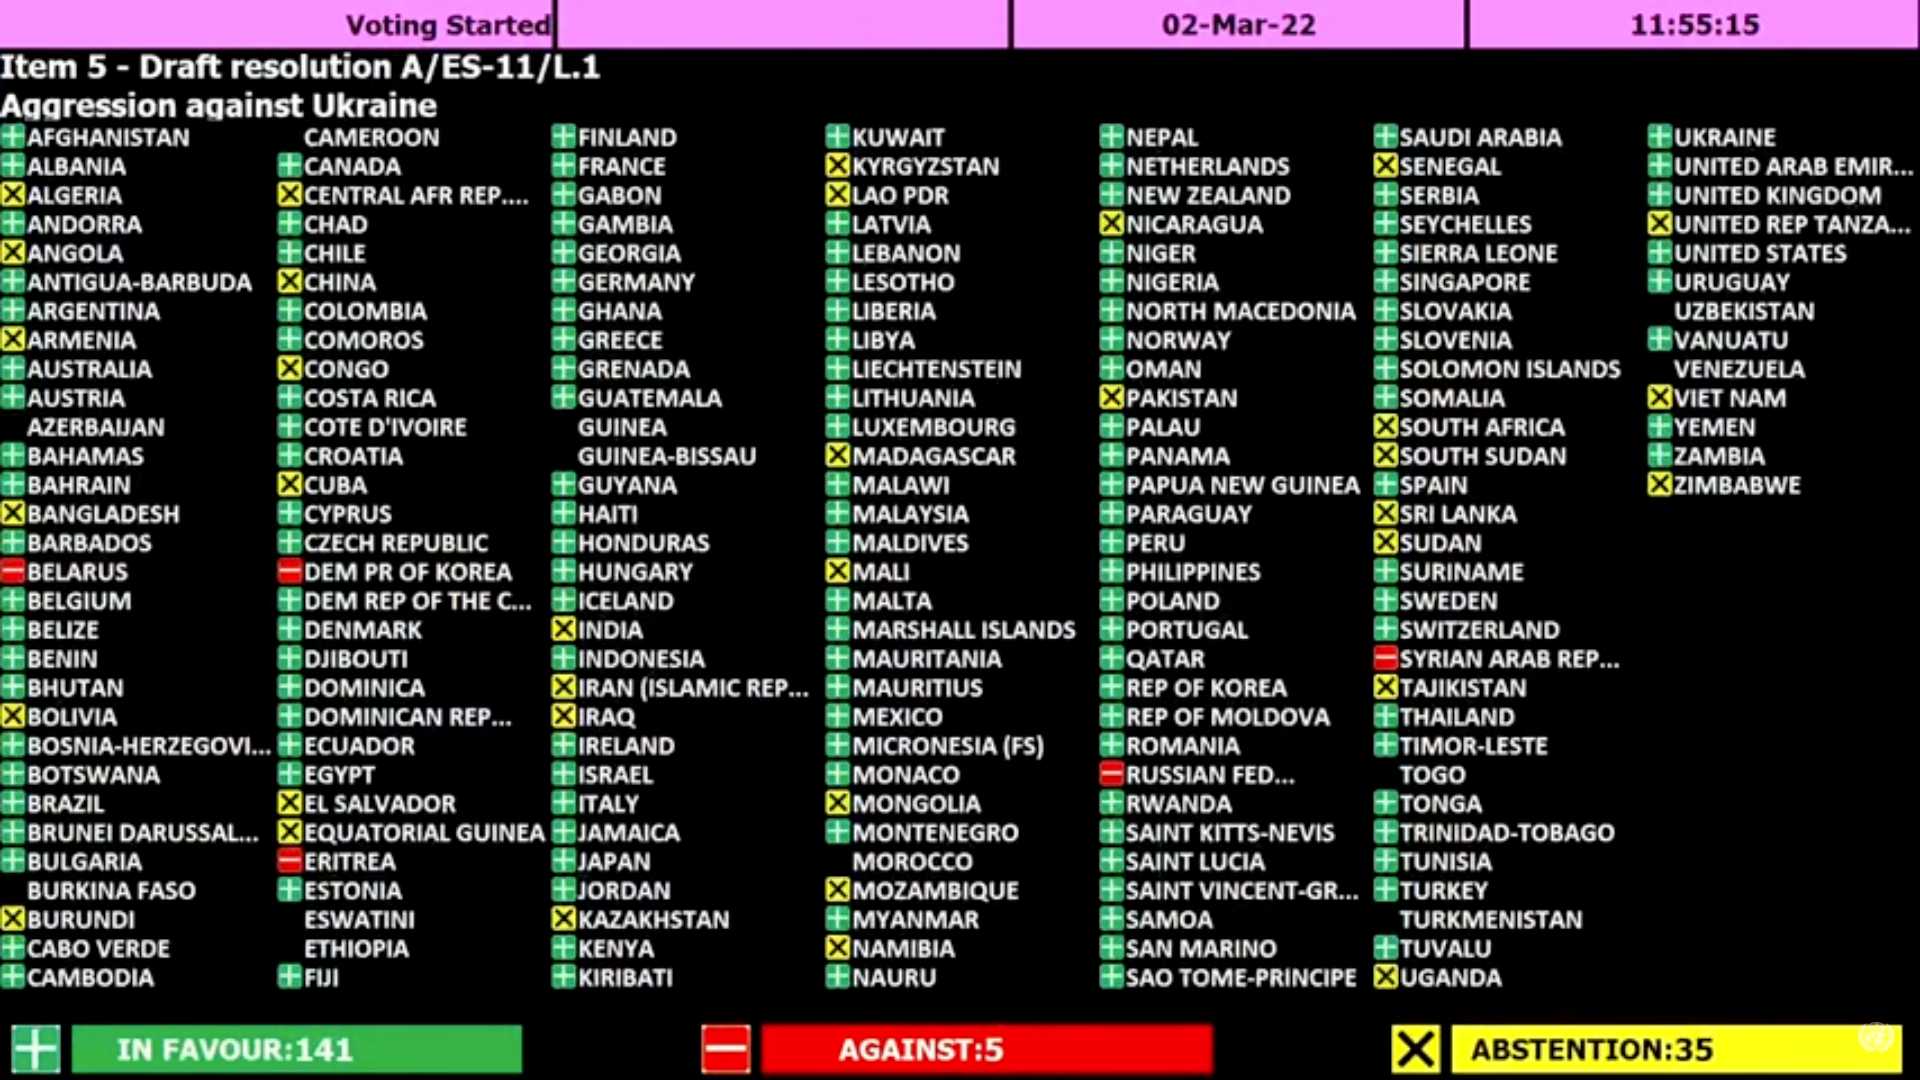 The UN voted overwhelmingly in favour of the resolution condemning Russia.